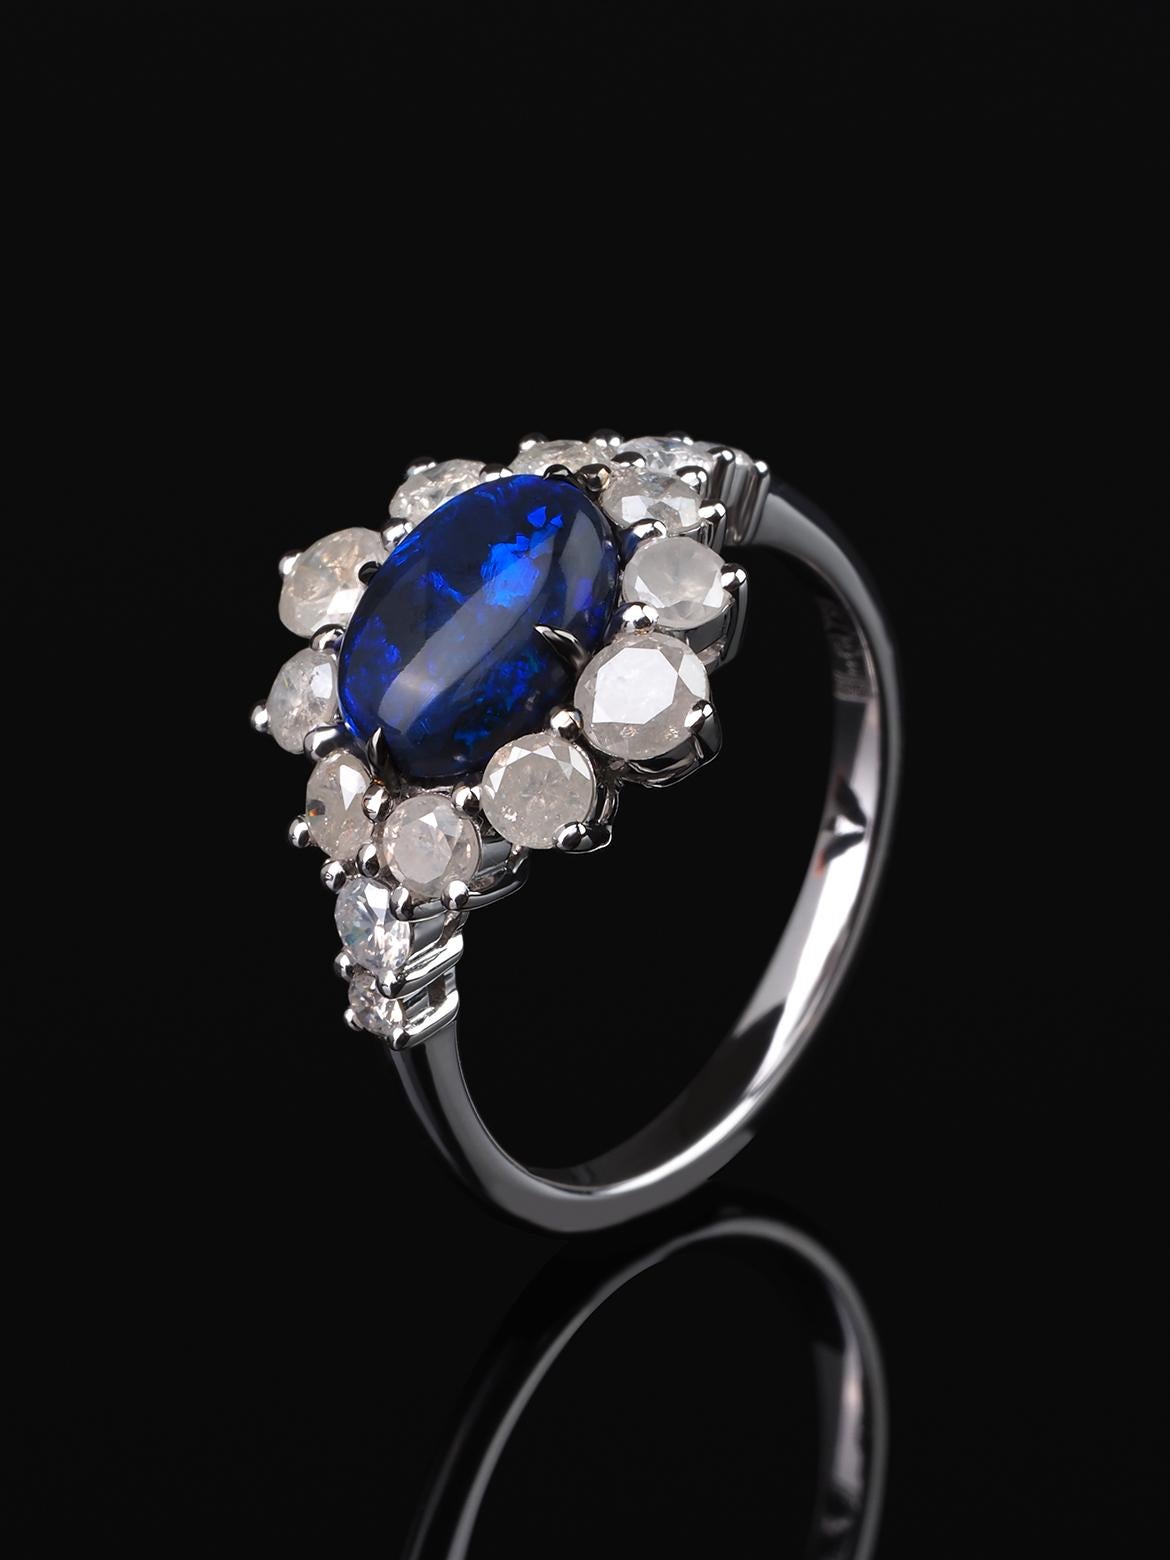 Black Opal Ring Diamond White Gold Engagement Ring Valentine's Day gift In New Condition For Sale In Berlin, DE